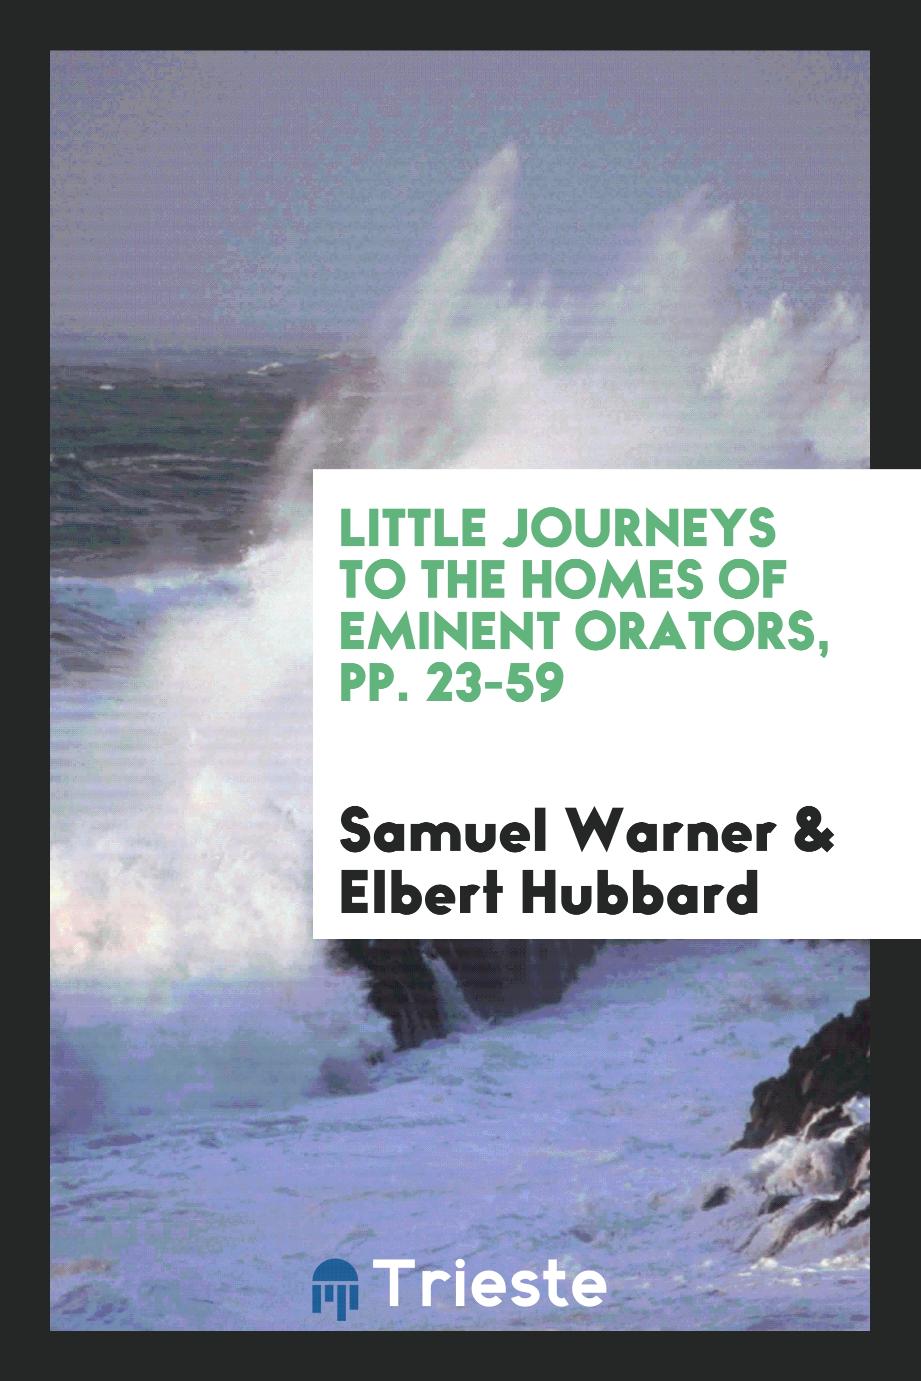 Little Journeys to the Homes of Eminent Orators, pp. 23-59